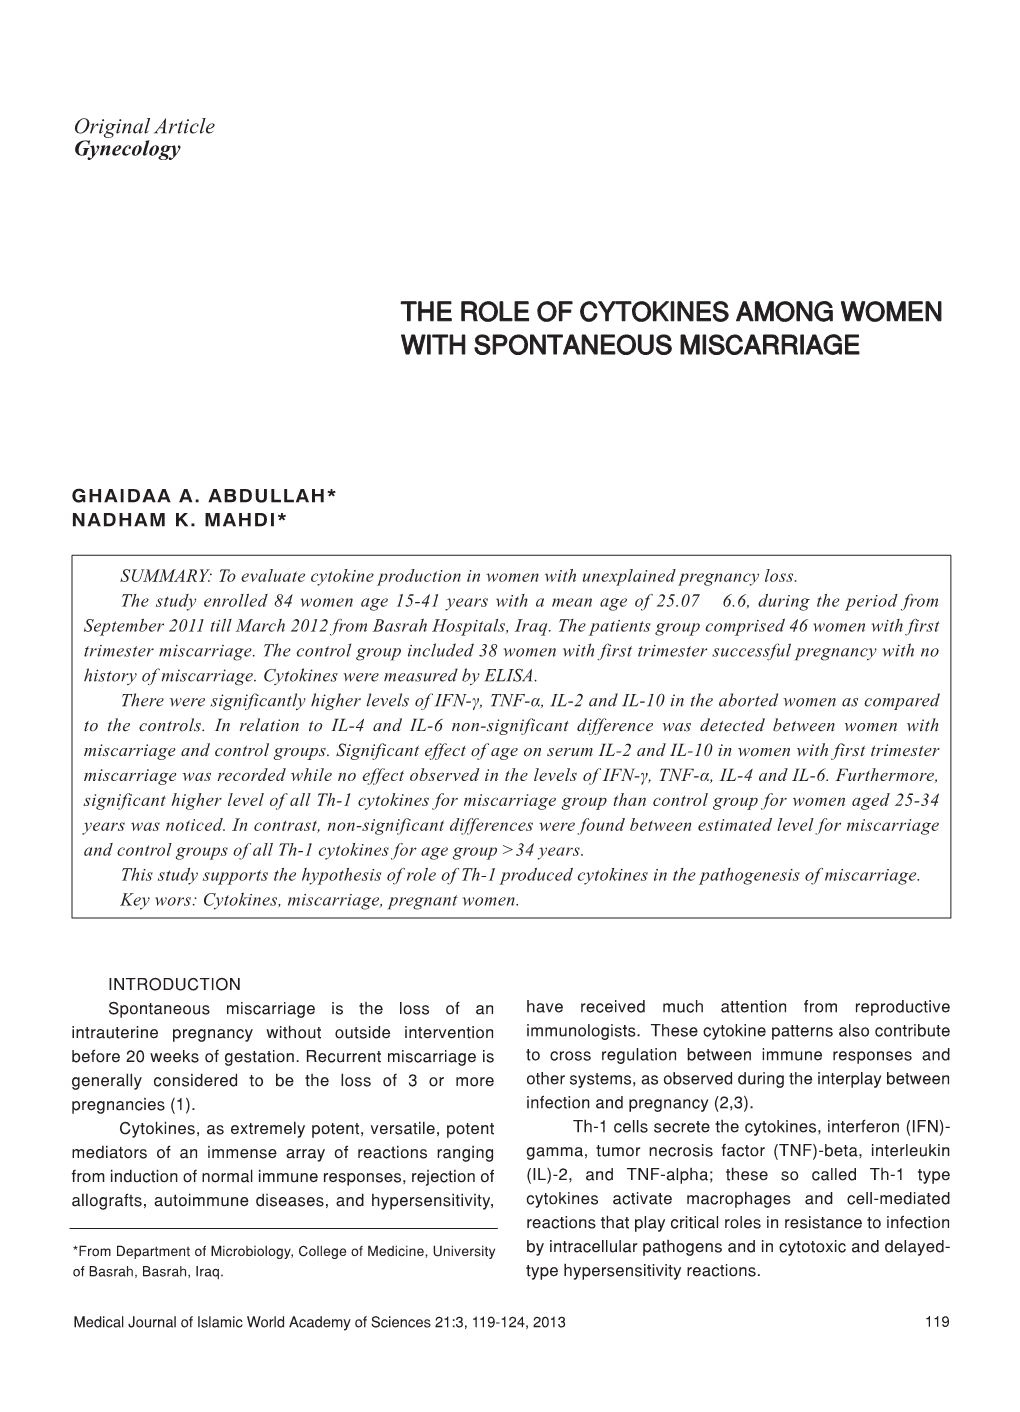 The Role of Cytokines Among Women with Spontaneous Miscarriage